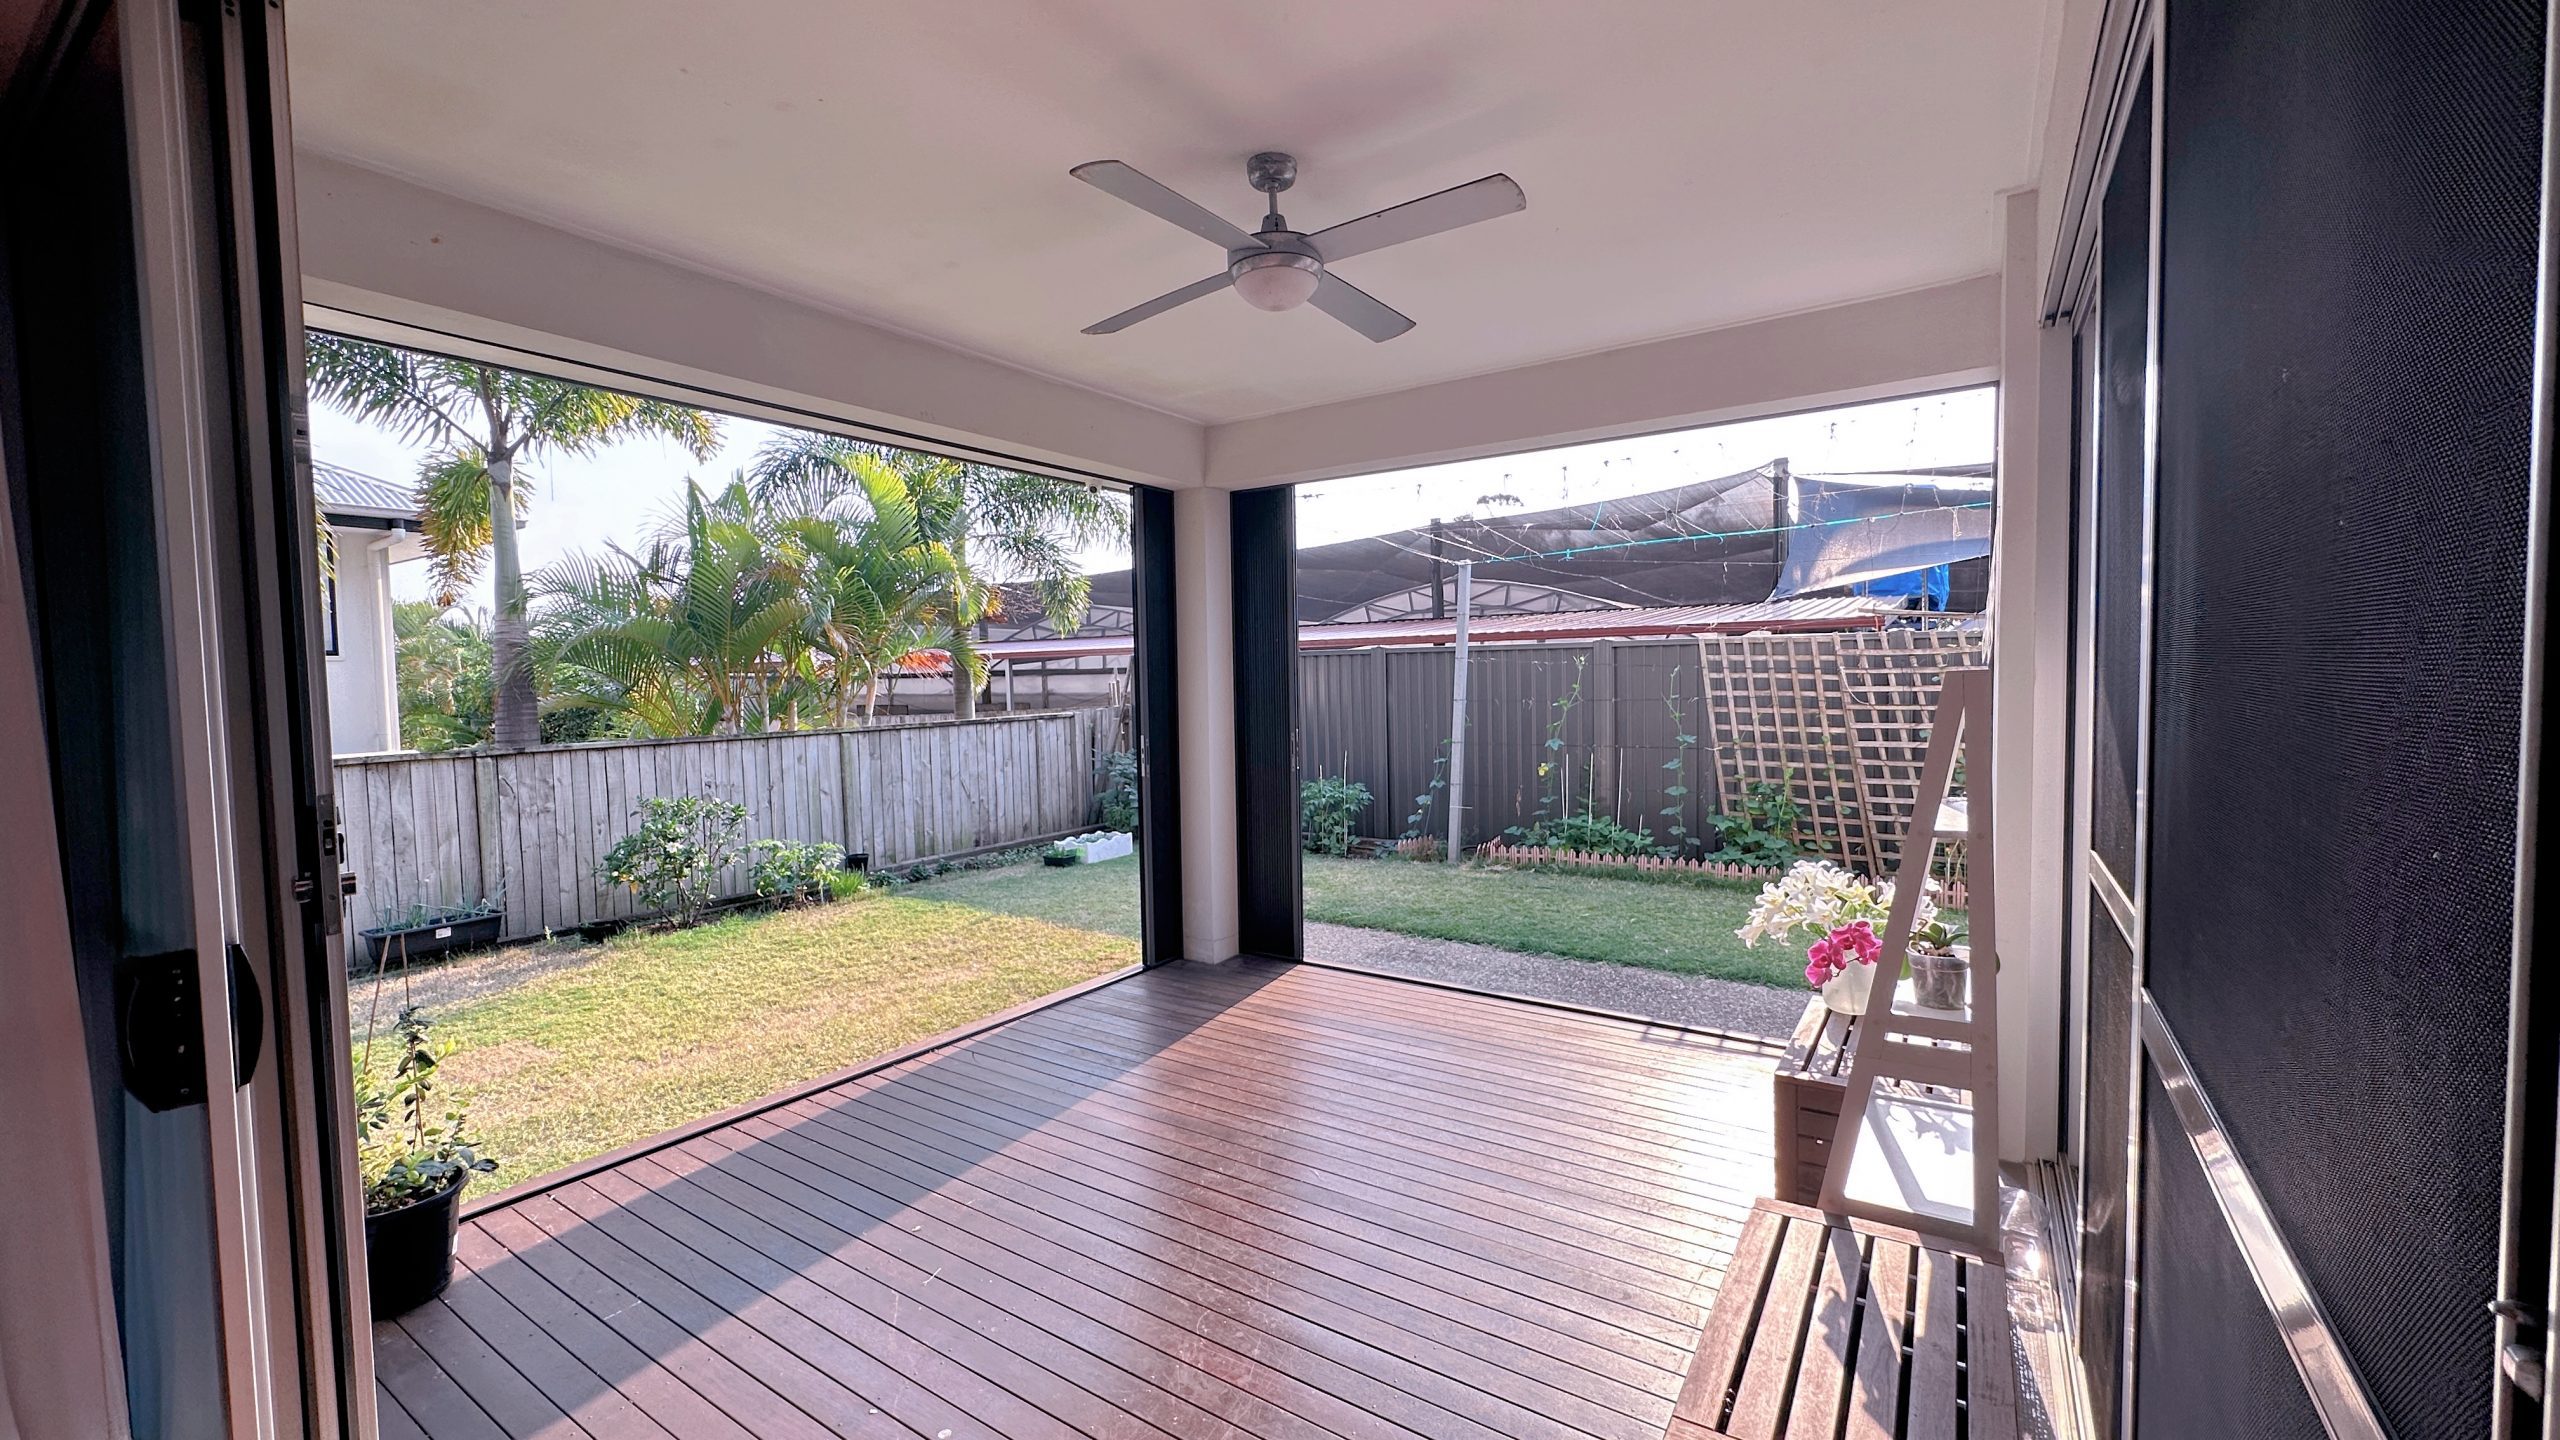 shut-it-solutions-blinds-awnings-shutters-brisbane-ipswich-toowoomba-sunshine-coast-gold-coast-tweed-heads-northern-rivers-retractable-flyscreens (1)